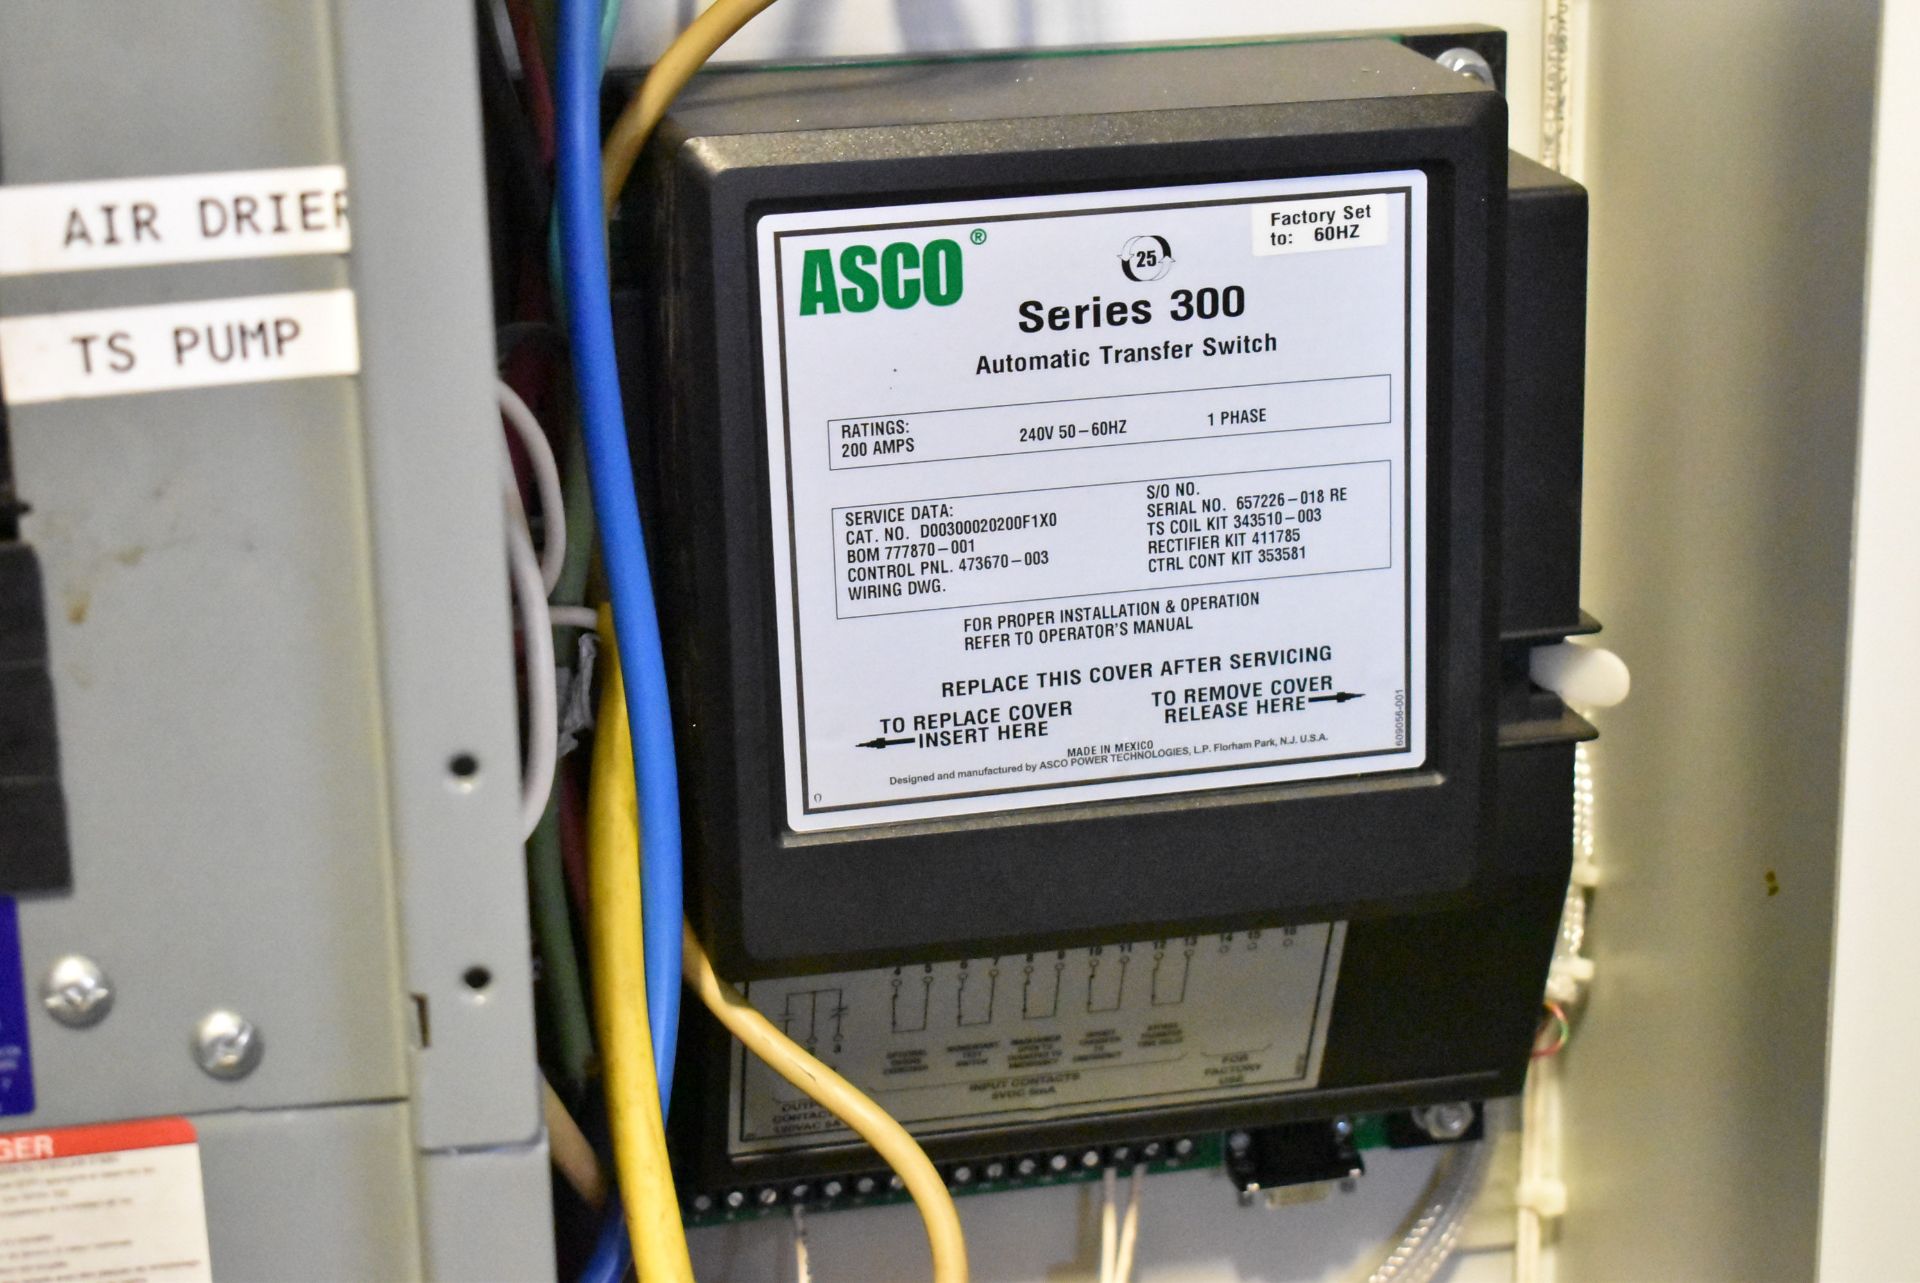 SQUARE D 200 AMP POWER PANEL WITH EMERSON ASCO SERIES 300 AUTOMATIC POWER TRANSFER SWITCH AND DUAL - Image 10 of 14